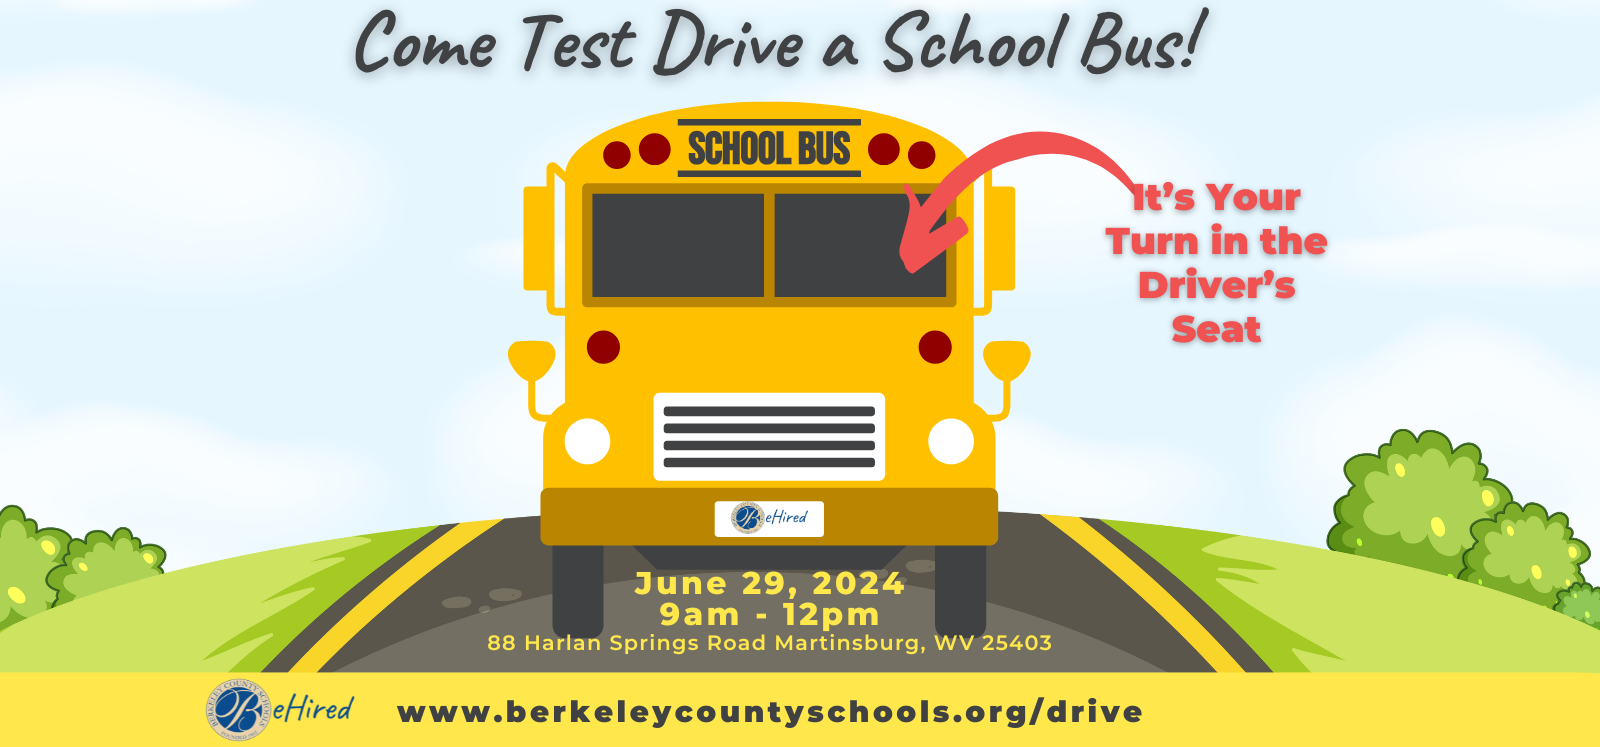 image of come test drive a school bus banner. full information in caption